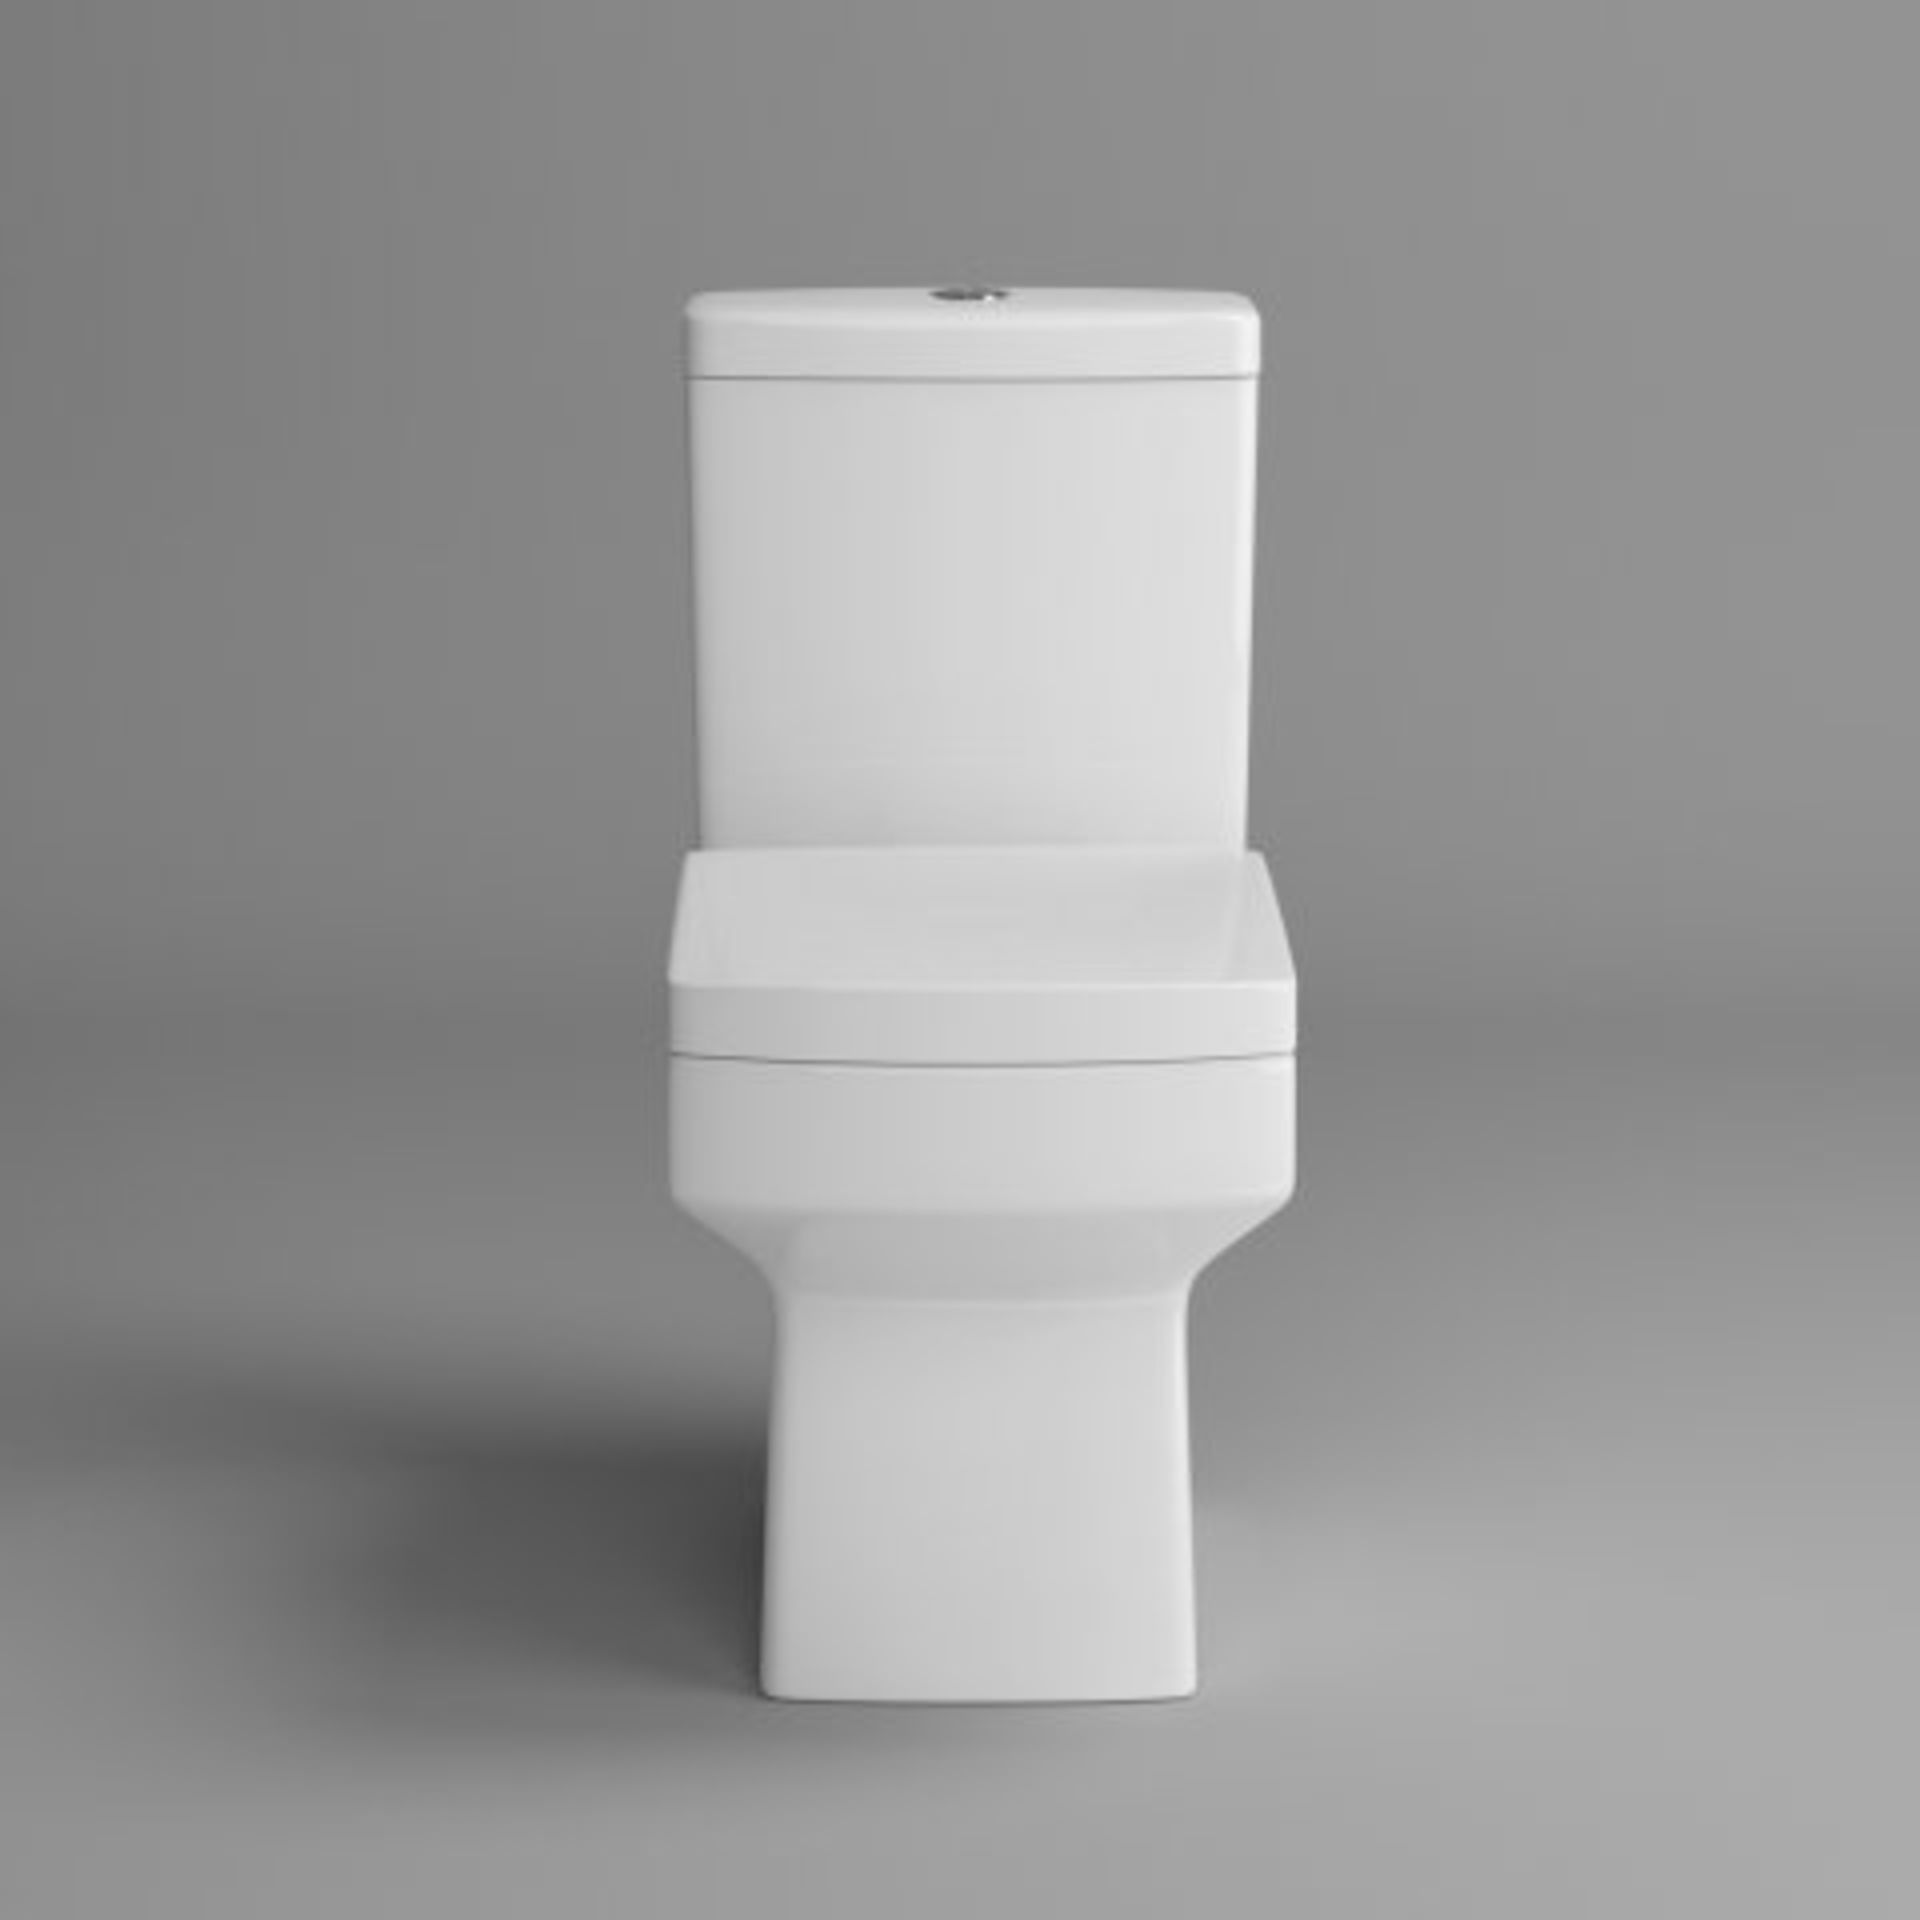 NEW & BOXED Belfort Close Coupled Toilet & Cistern inc Soft Close Seat. RRP £499.99.CC645.Lon... - Image 3 of 3